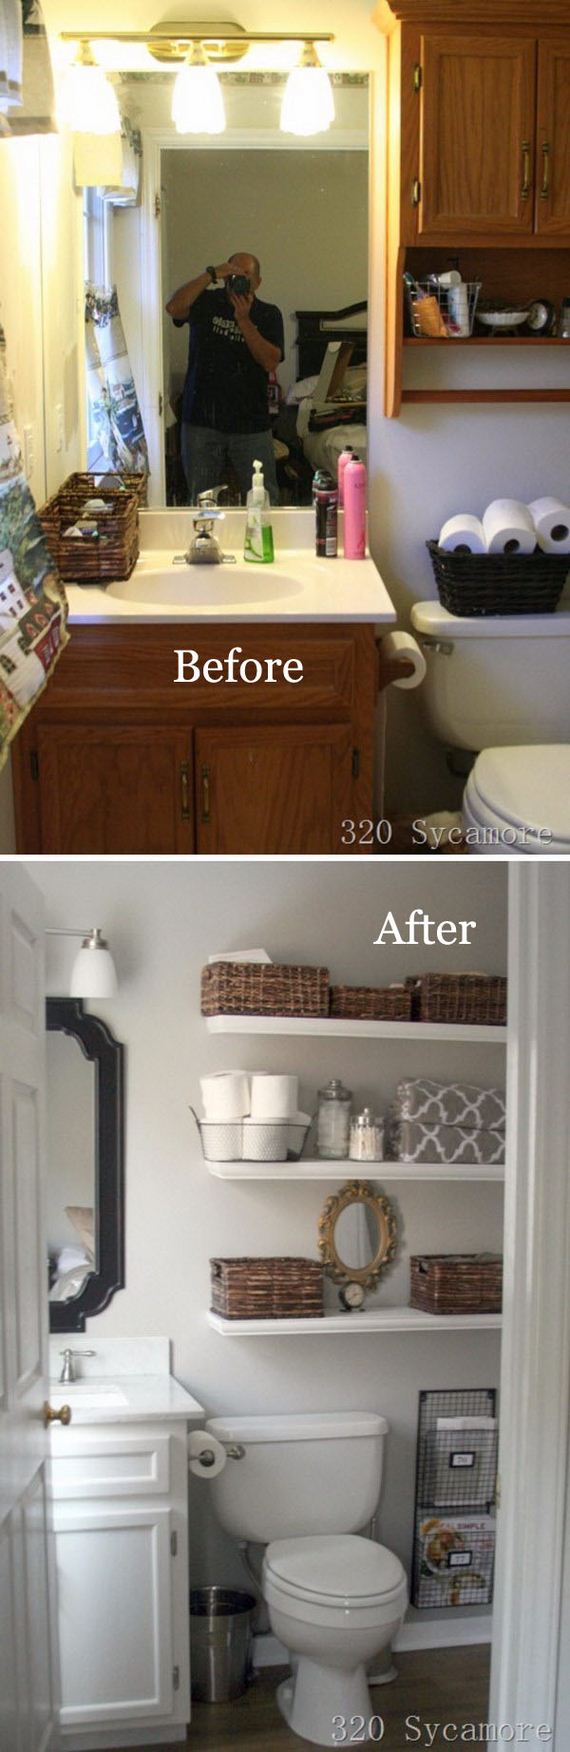 16-awesome-bathroom-makeovers